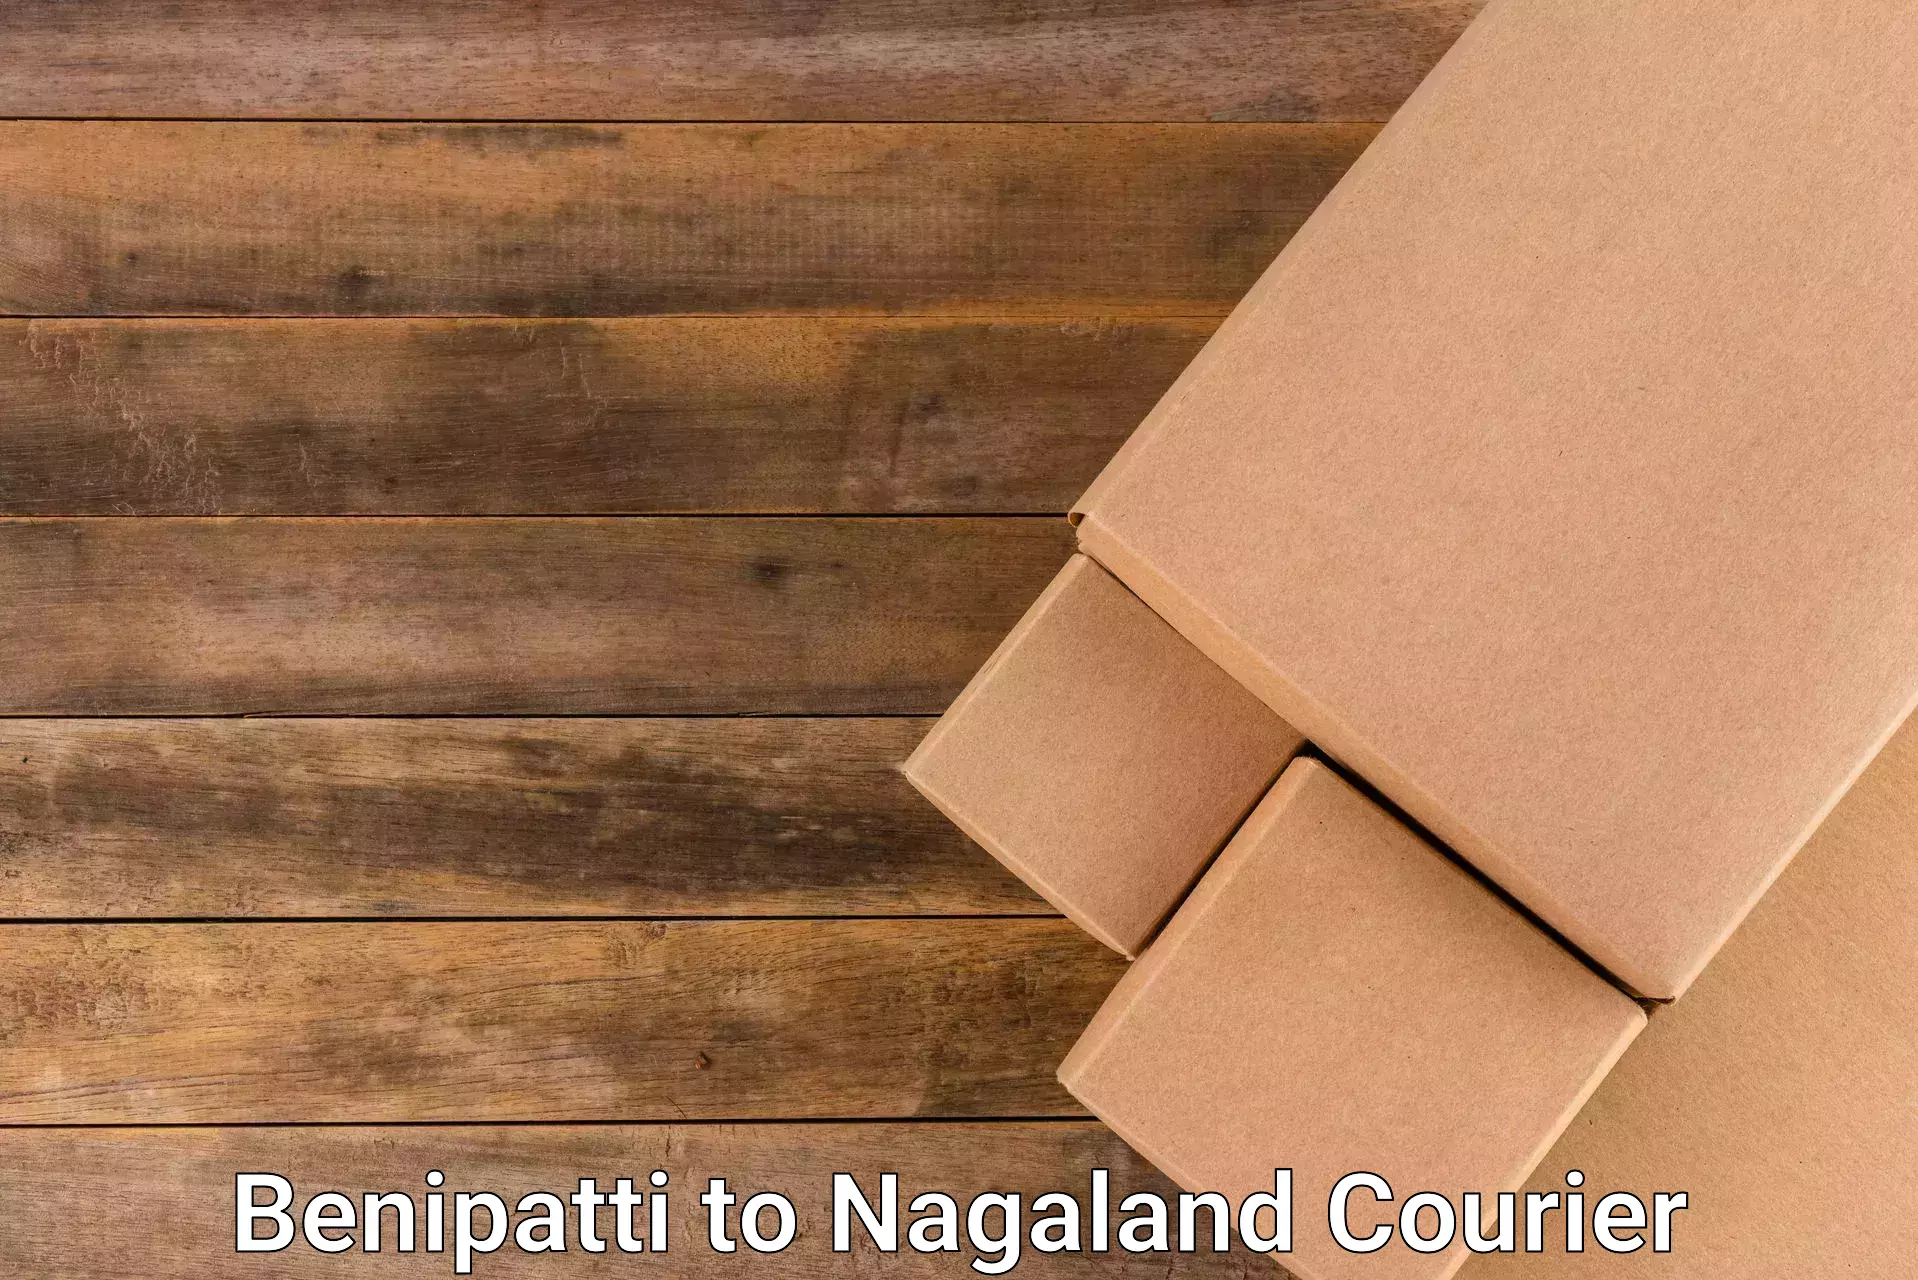 Large-scale shipping solutions Benipatti to Nagaland